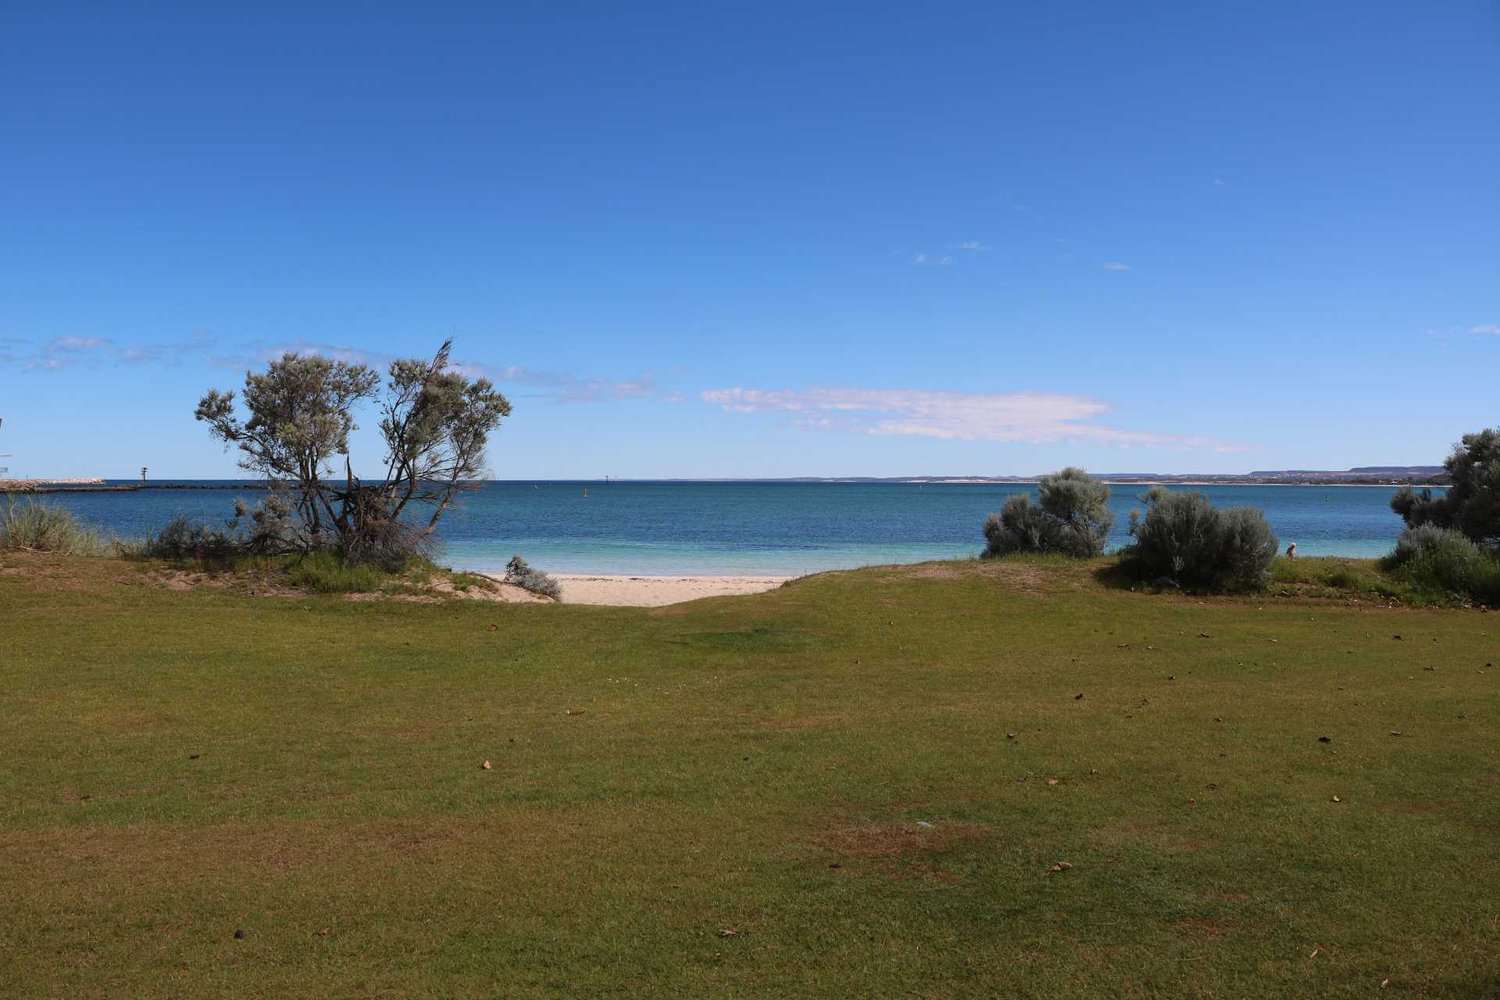 A Beach in Geraldton, with its calm blue waters meeting a clear horizon and a soft sandy beach flanked by grassy areas and a solitary windswept tree.